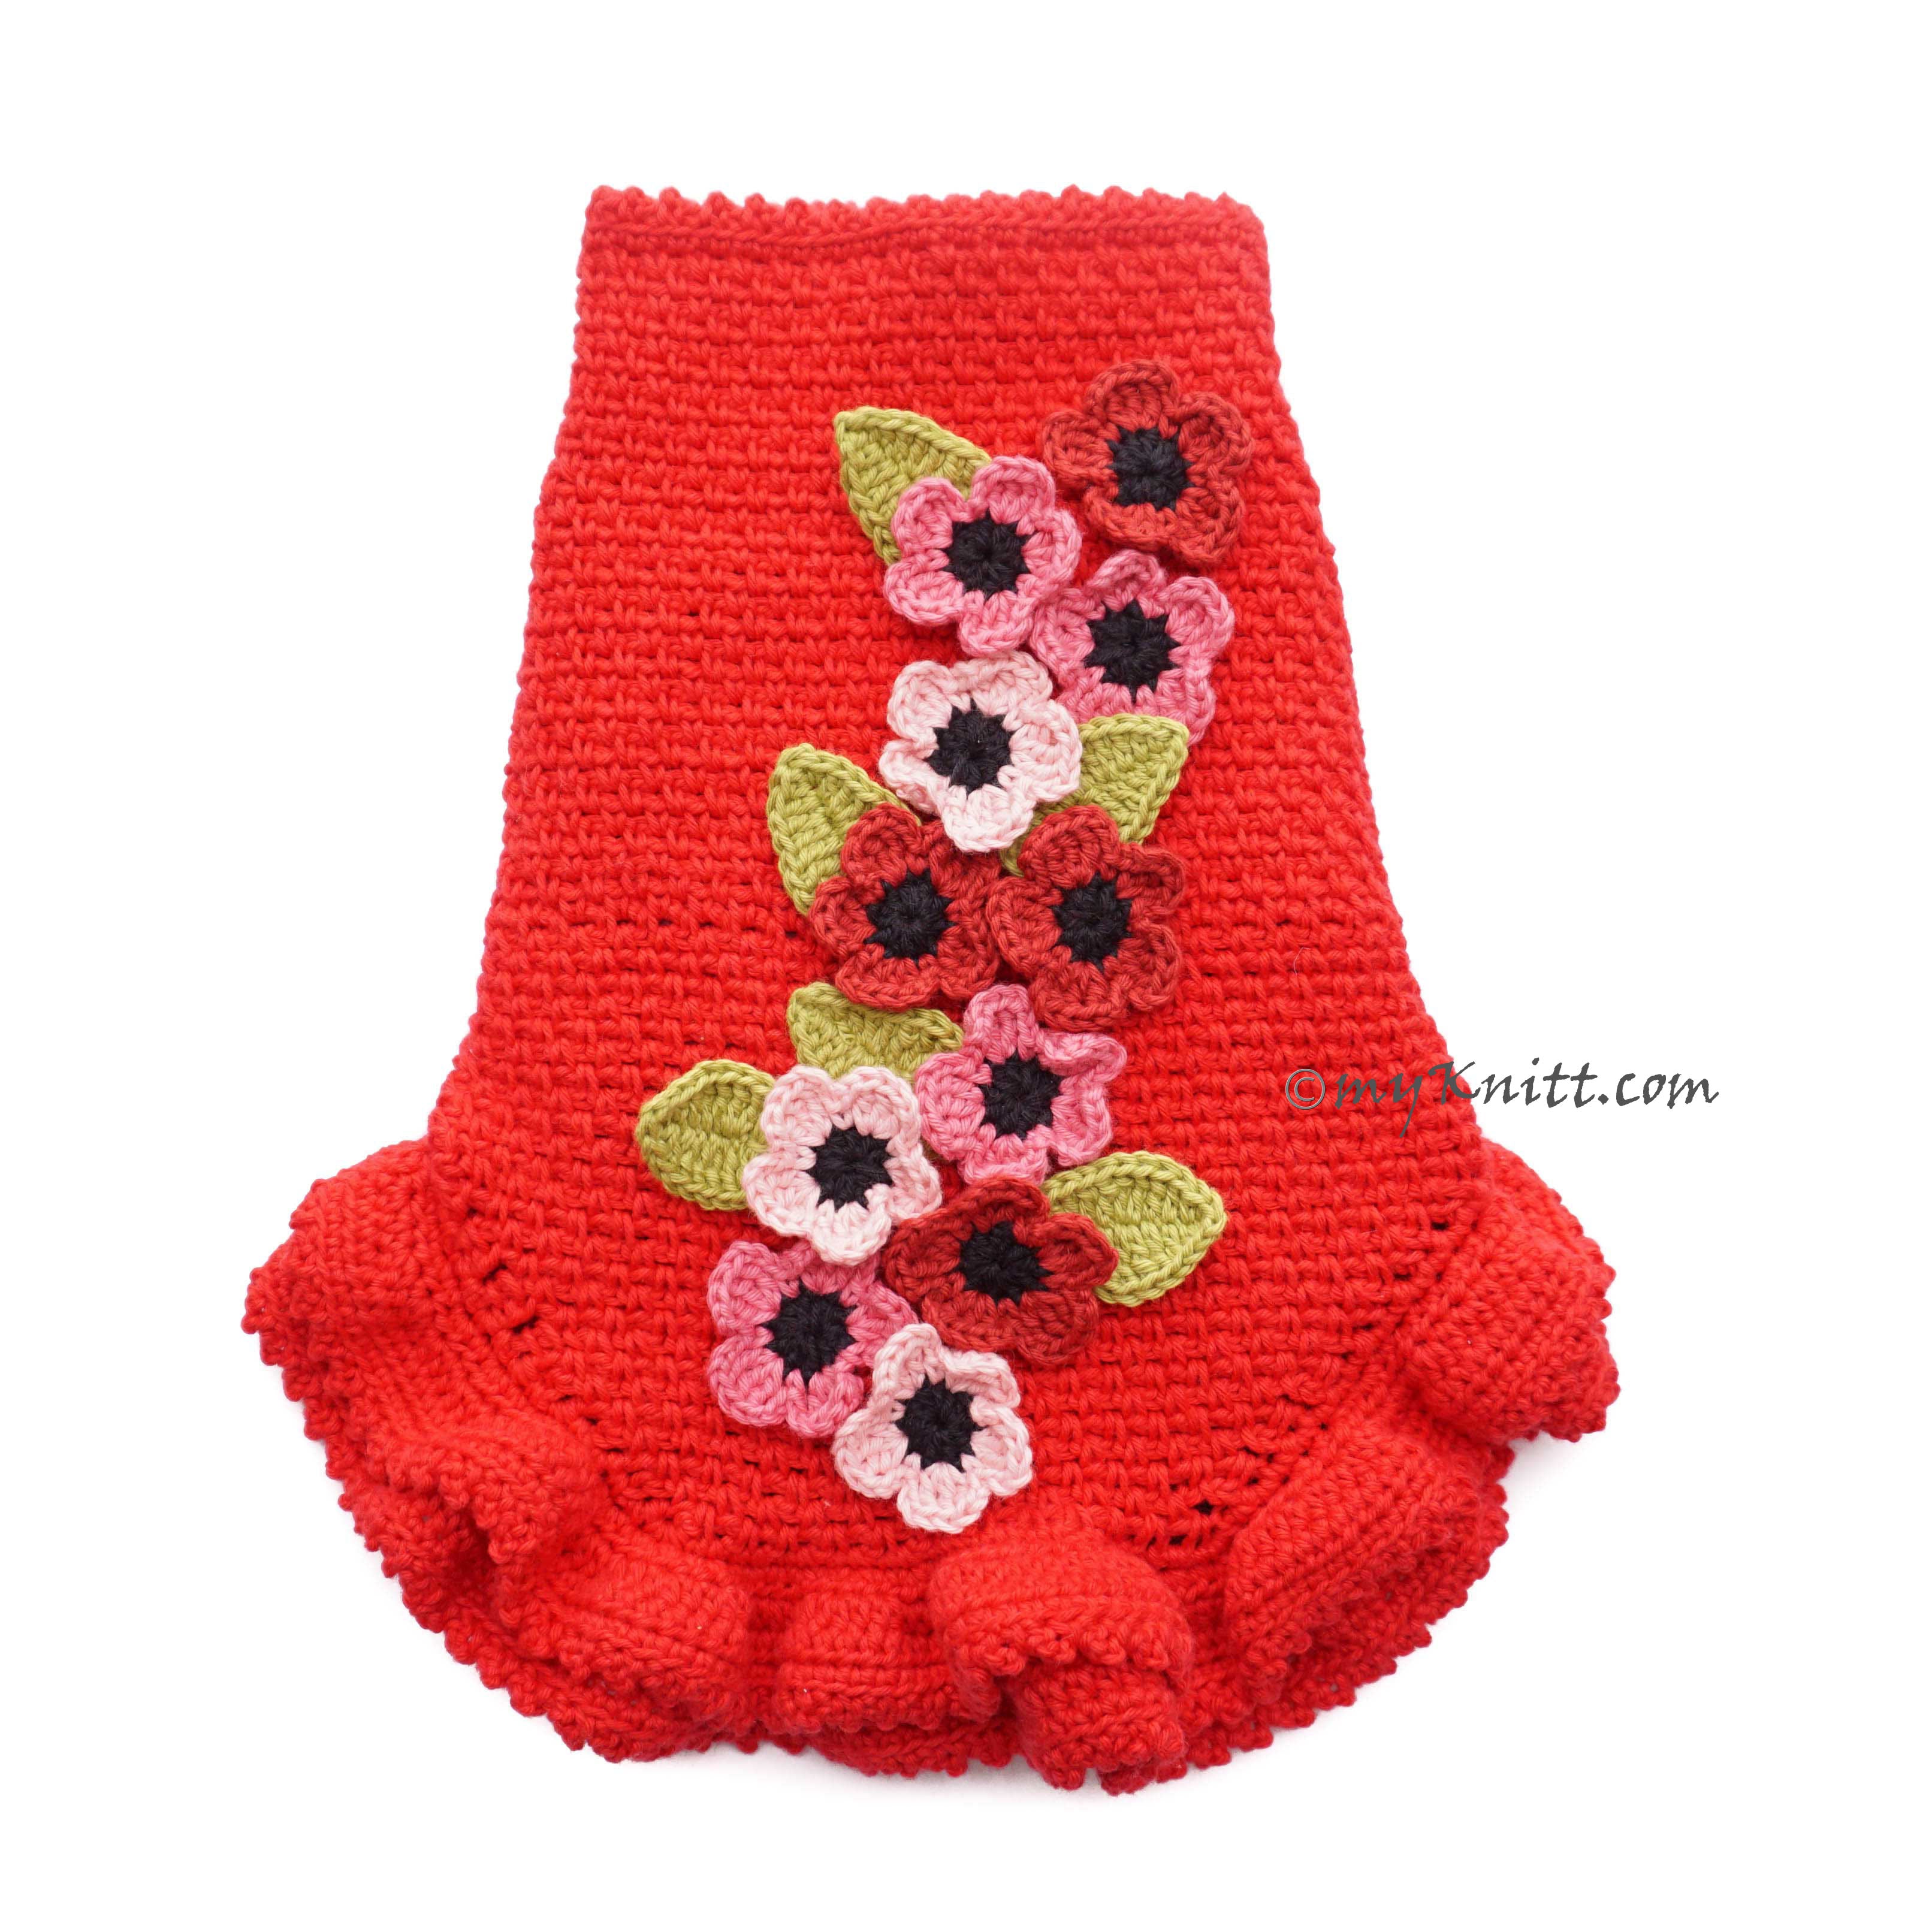 Red dog dress flower crochet, red Chihuahua clothes, puppy clothes DF193 Myknitt